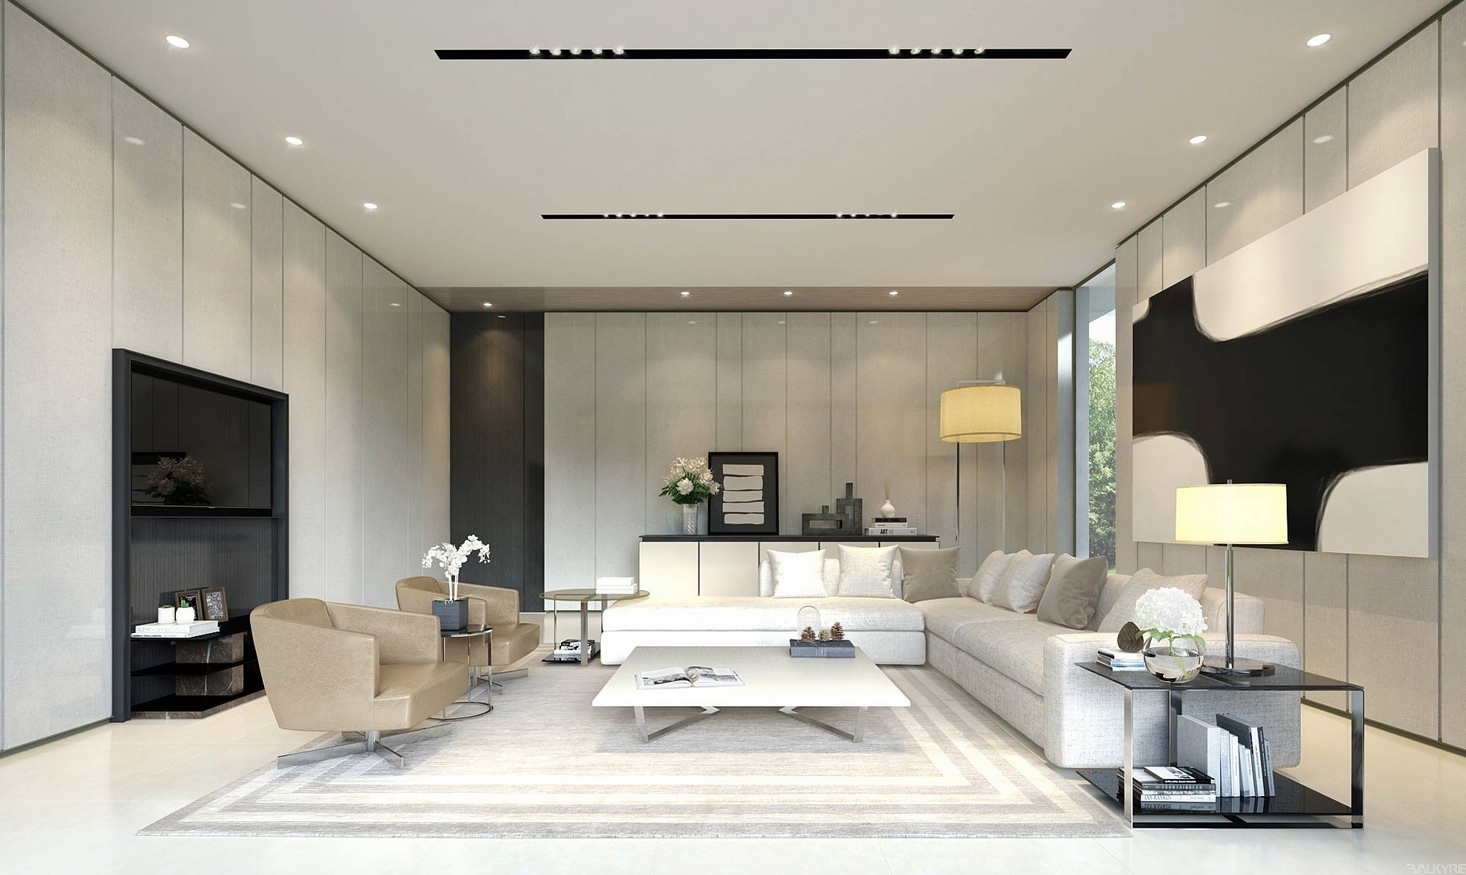 white luxury living room design "width =" 1466 "height =" 875 "srcset =" https://mileray.com/wp-content/uploads/2020/05/Awesome-Living-Room-Design-Ideas-With-Variety-of-Trendy-and.jpeg 1466w, https: // myfashionos. com / wp-content / uploads / 2016/09 / Valkyrie-Studio-300x179.jpeg 300w, https://mileray.com/wp-content/uploads/2016/09/Valkyrie-Studio-768x458.jpeg 768w, https: //mileray.com/wp-content/uploads/2016/09/Valkyrie-Studio-1024x611.jpeg 1024w, https://mileray.com/wp-content/uploads/2016/09/Valkyrie-Studio-696x415.jpeg 696w, https://mileray.com/wp-content/uploads/2016/09/Valkyrie-Studio-1068x637.jpeg 1068w, https://mileray.com/wp-content/uploads/2016/09/Valkyrie-Studio -704x420.jpeg 704w "sizes =" (maximum width: 1466px) 100vw, 1466px